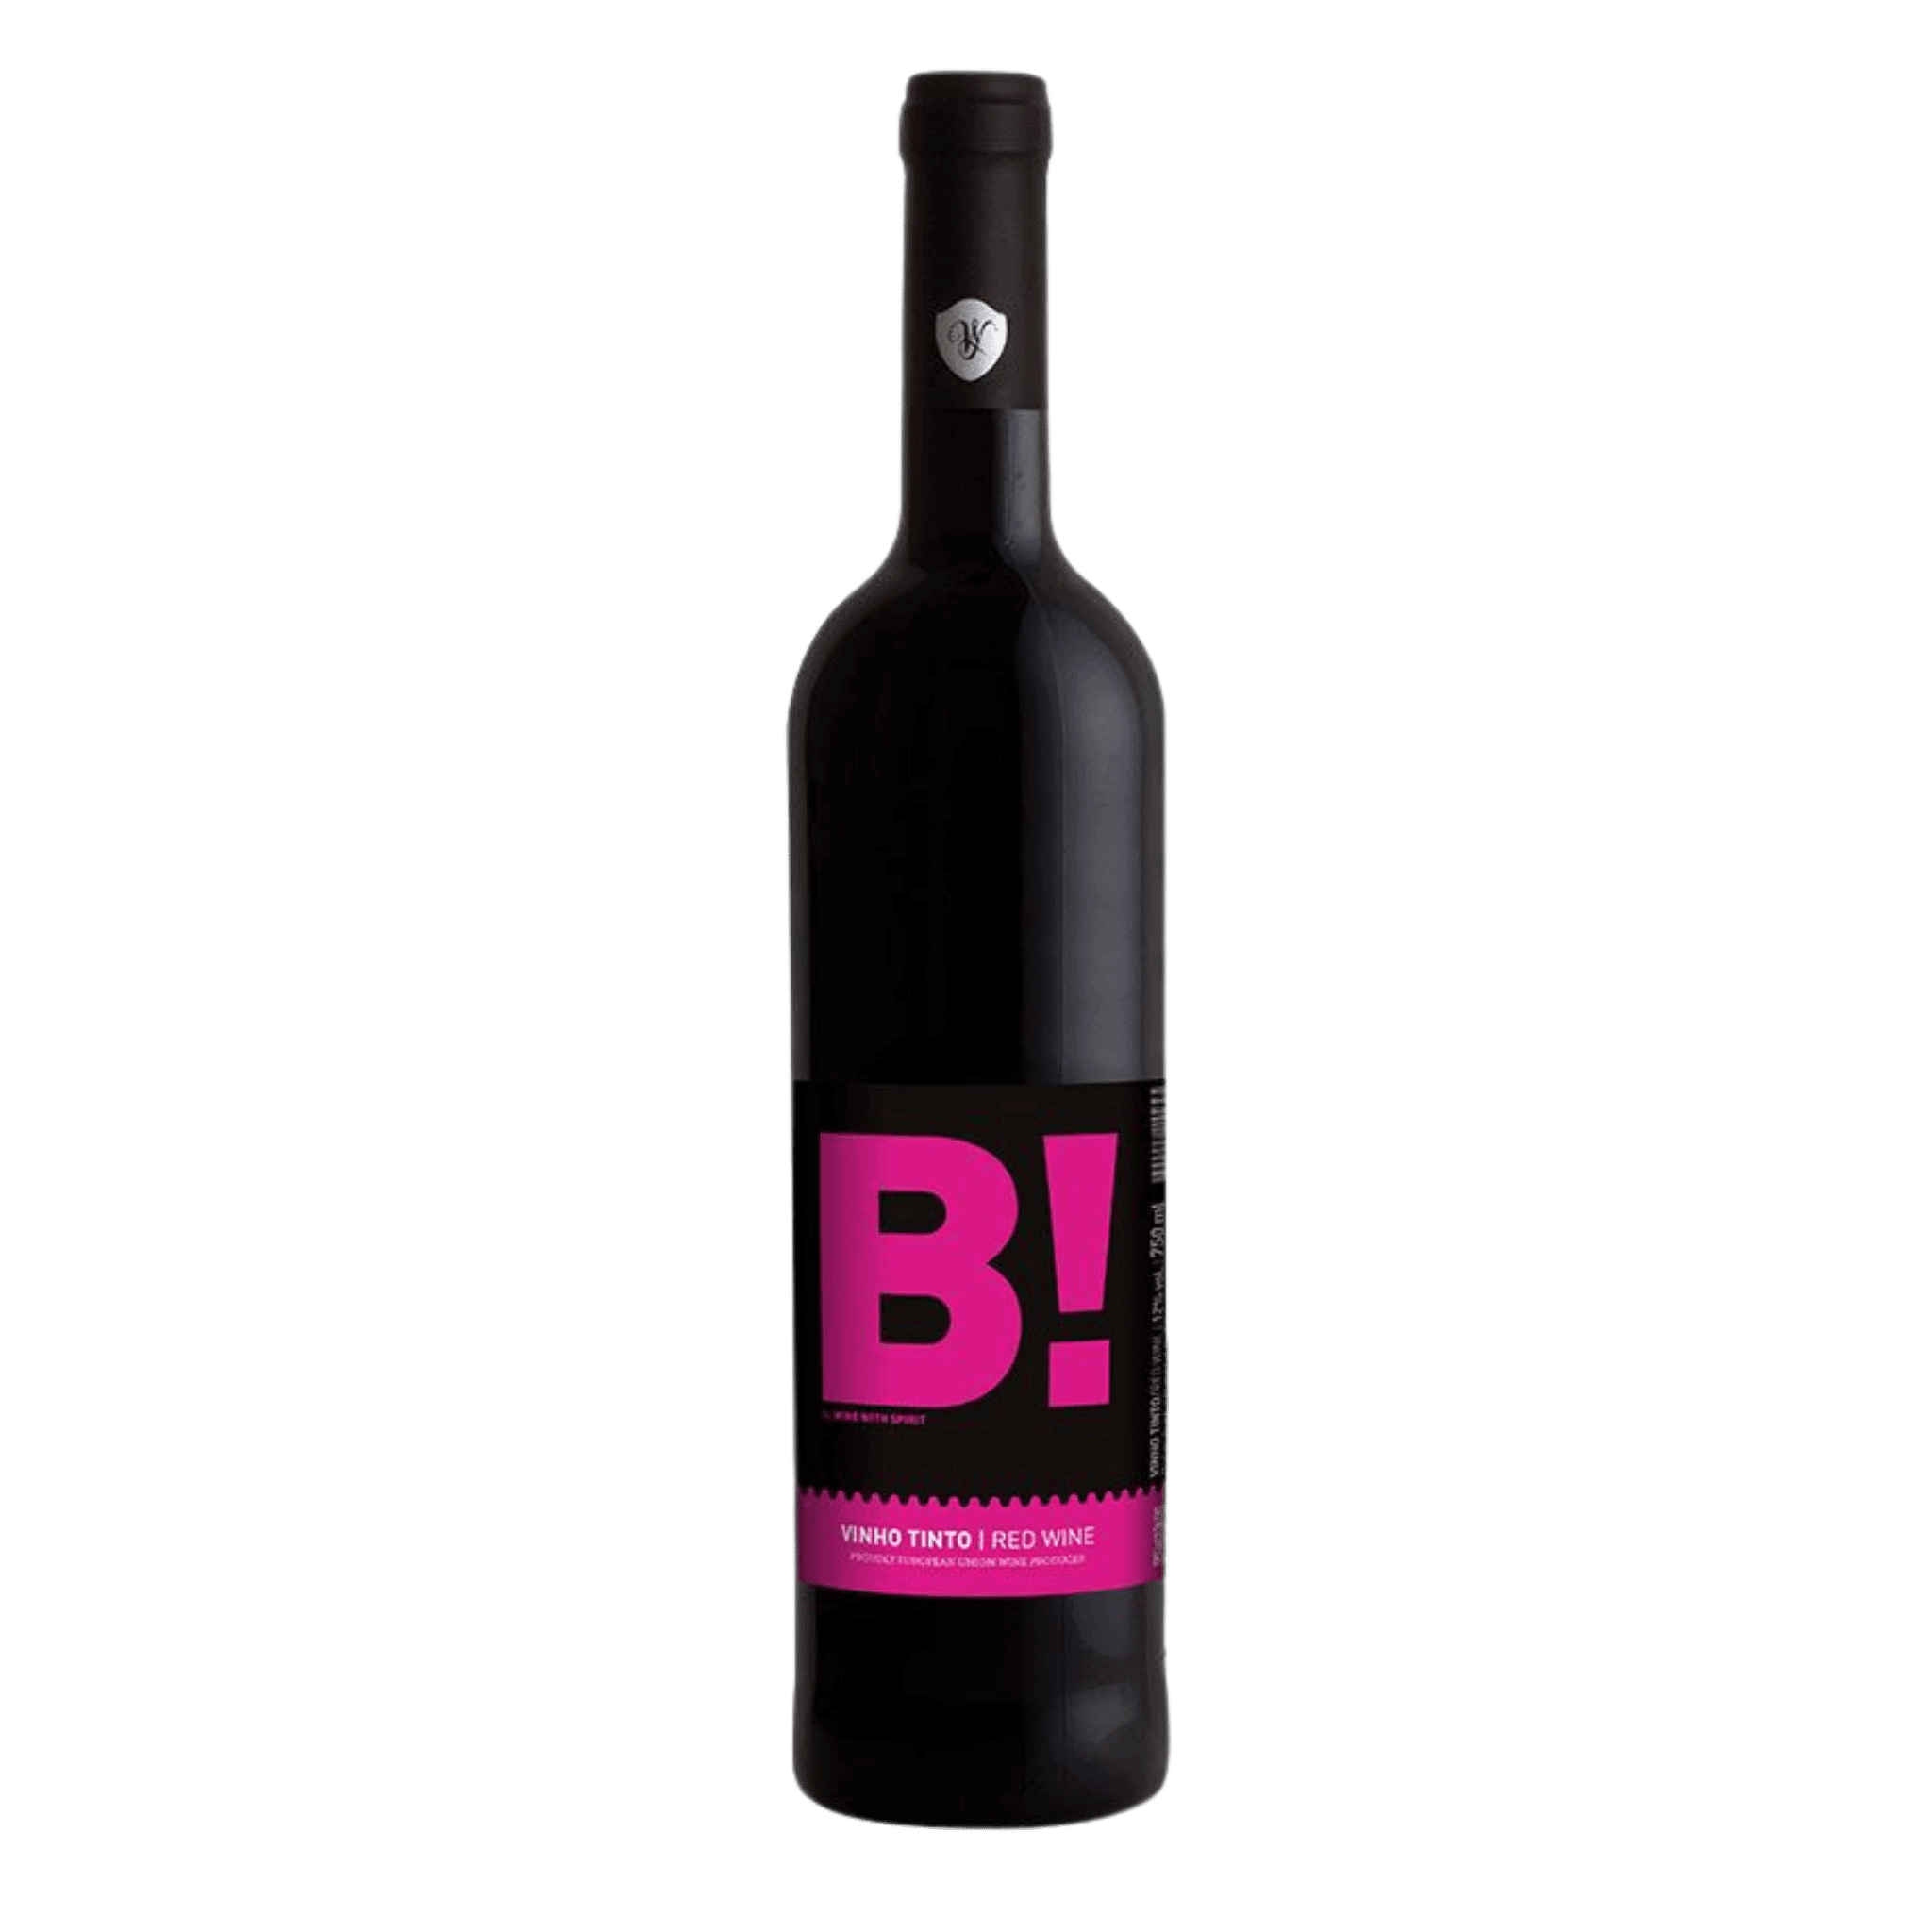 B! Red 750ml at ₱949.00